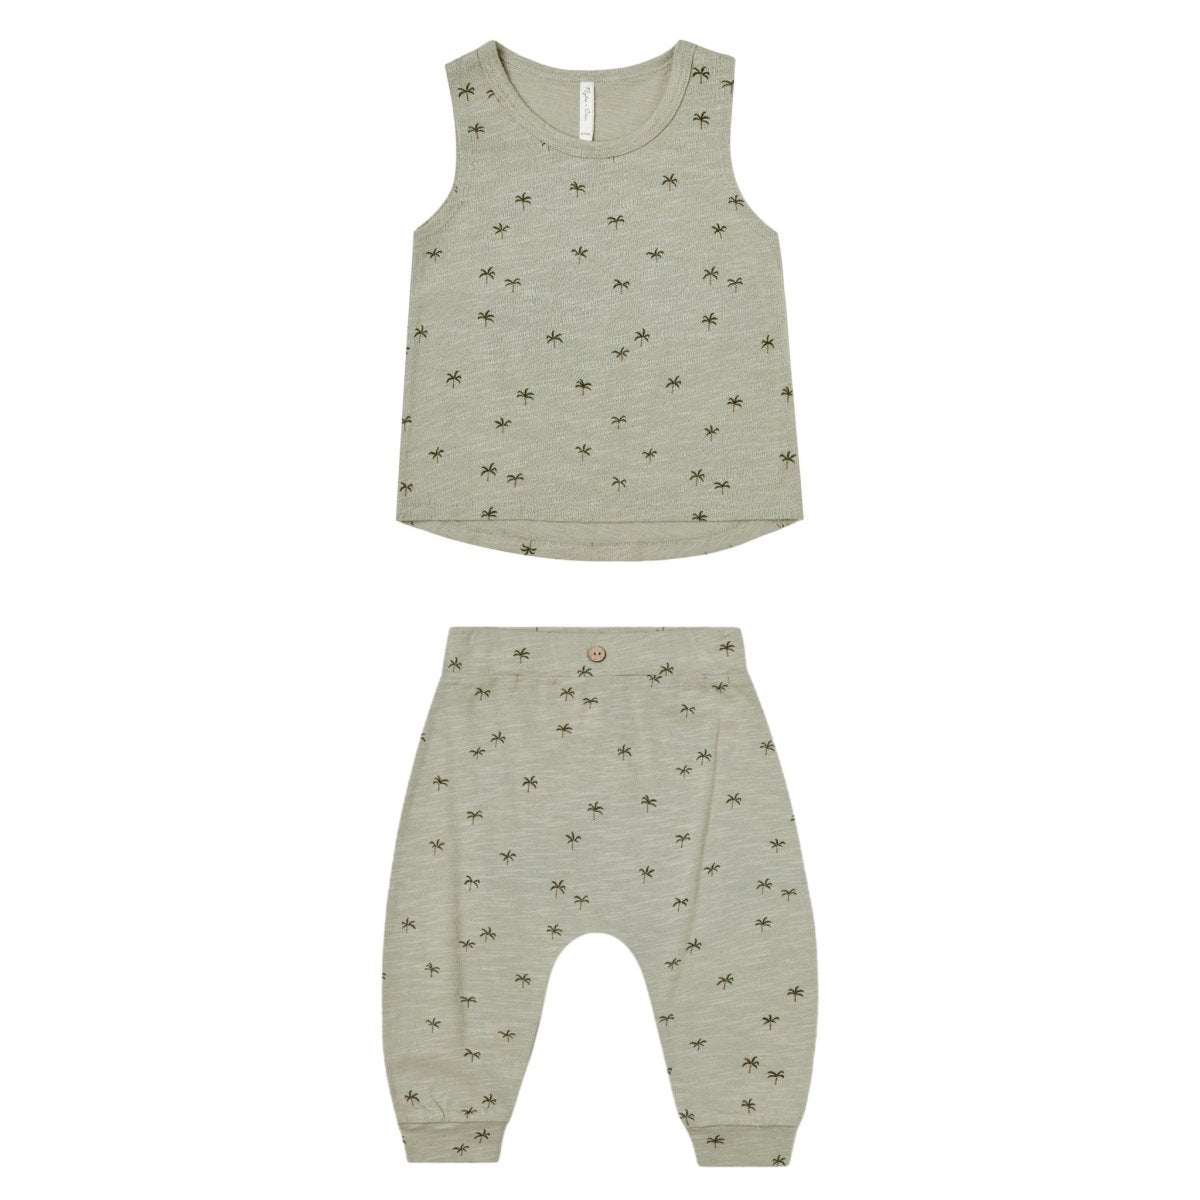 PALM TREES TANK TOP AND SWEATPANTS SET - ROMPERS